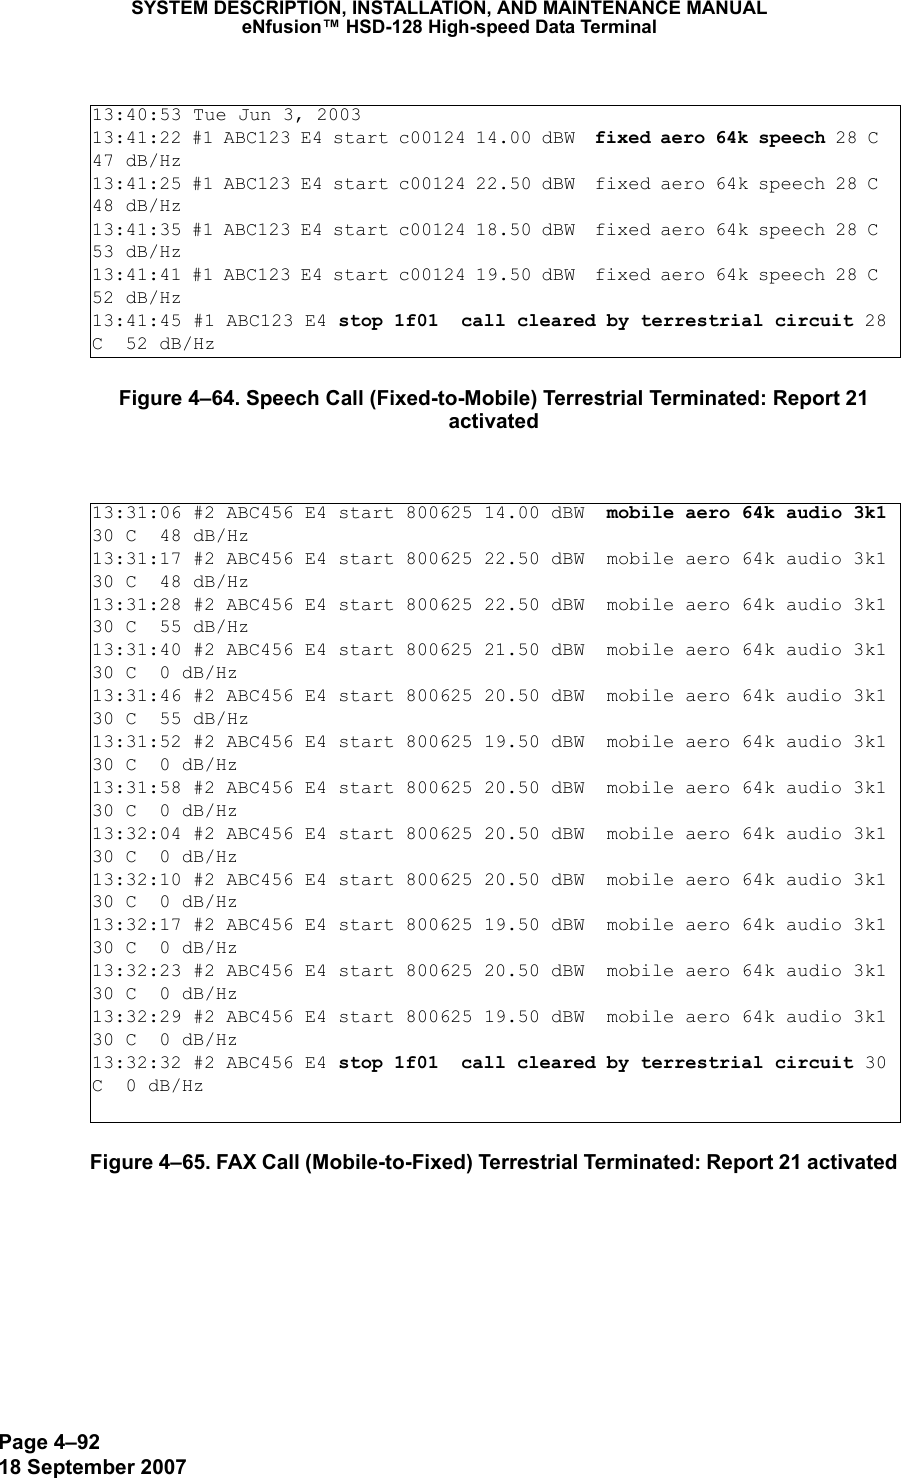 Page 4–9218 September 2007SYSTEM DESCRIPTION, INSTALLATION, AND MAINTENANCE MANUALeNfusion™ HSD-128 High-speed Data TerminalFigure 4–64. Speech Call (Fixed-to-Mobile) Terrestrial Terminated: Report 21 activatedFigure 4–65. FAX Call (Mobile-to-Fixed) Terrestrial Terminated: Report 21 activated13:40:53 Tue Jun 3, 200313:41:22 #1 ABC123 E4 start c00124 14.00 dBW  fixed aero 64k speech 28 C  47 dB/Hz13:41:25 #1 ABC123 E4 start c00124 22.50 dBW  fixed aero 64k speech 28 C  48 dB/Hz13:41:35 #1 ABC123 E4 start c00124 18.50 dBW  fixed aero 64k speech 28 C  53 dB/Hz13:41:41 #1 ABC123 E4 start c00124 19.50 dBW  fixed aero 64k speech 28 C  52 dB/Hz13:41:45 #1 ABC123 E4 stop 1f01  call cleared by terrestrial circuit 28 C  52 dB/Hz13:31:06 #2 ABC456 E4 start 800625 14.00 dBW  mobile aero 64k audio 3k1 30 C  48 dB/Hz13:31:17 #2 ABC456 E4 start 800625 22.50 dBW  mobile aero 64k audio 3k1 30 C  48 dB/Hz13:31:28 #2 ABC456 E4 start 800625 22.50 dBW  mobile aero 64k audio 3k1 30 C  55 dB/Hz13:31:40 #2 ABC456 E4 start 800625 21.50 dBW  mobile aero 64k audio 3k1 30 C  0 dB/Hz13:31:46 #2 ABC456 E4 start 800625 20.50 dBW  mobile aero 64k audio 3k1 30 C  55 dB/Hz13:31:52 #2 ABC456 E4 start 800625 19.50 dBW  mobile aero 64k audio 3k1 30 C  0 dB/Hz13:31:58 #2 ABC456 E4 start 800625 20.50 dBW  mobile aero 64k audio 3k1 30 C  0 dB/Hz13:32:04 #2 ABC456 E4 start 800625 20.50 dBW  mobile aero 64k audio 3k1 30 C  0 dB/Hz13:32:10 #2 ABC456 E4 start 800625 20.50 dBW  mobile aero 64k audio 3k1 30 C  0 dB/Hz13:32:17 #2 ABC456 E4 start 800625 19.50 dBW  mobile aero 64k audio 3k1 30 C  0 dB/Hz13:32:23 #2 ABC456 E4 start 800625 20.50 dBW  mobile aero 64k audio 3k1 30 C  0 dB/Hz13:32:29 #2 ABC456 E4 start 800625 19.50 dBW  mobile aero 64k audio 3k1 30 C  0 dB/Hz13:32:32 #2 ABC456 E4 stop 1f01  call cleared by terrestrial circuit 30 C  0 dB/Hz